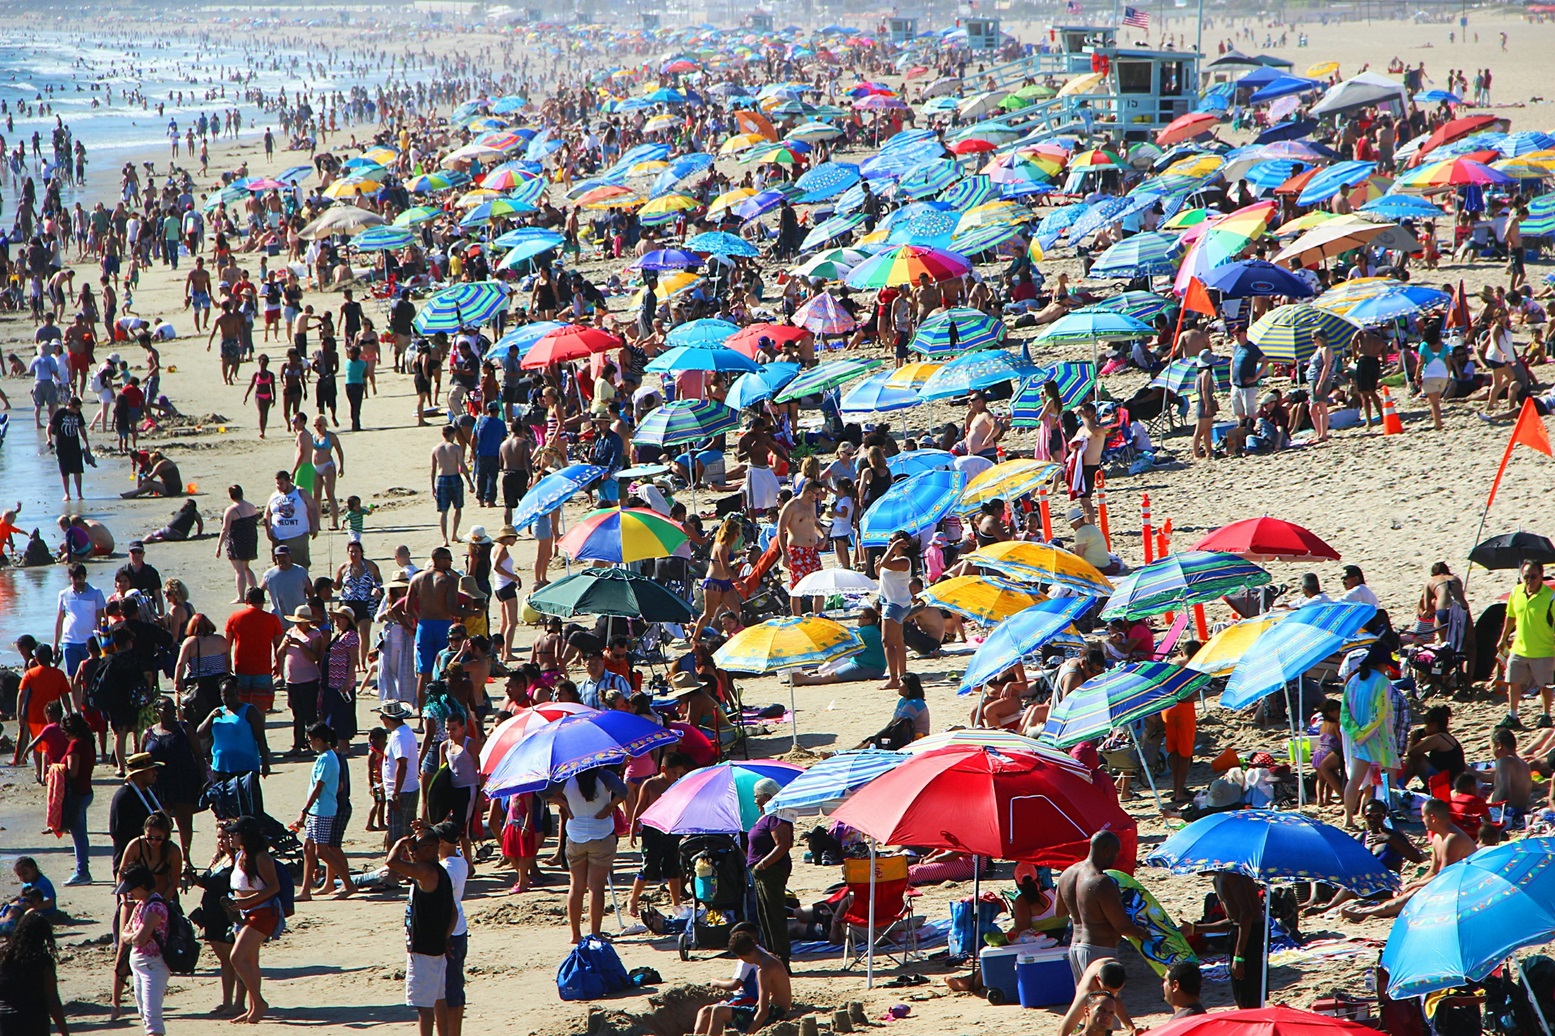 Crowded beach pictured.